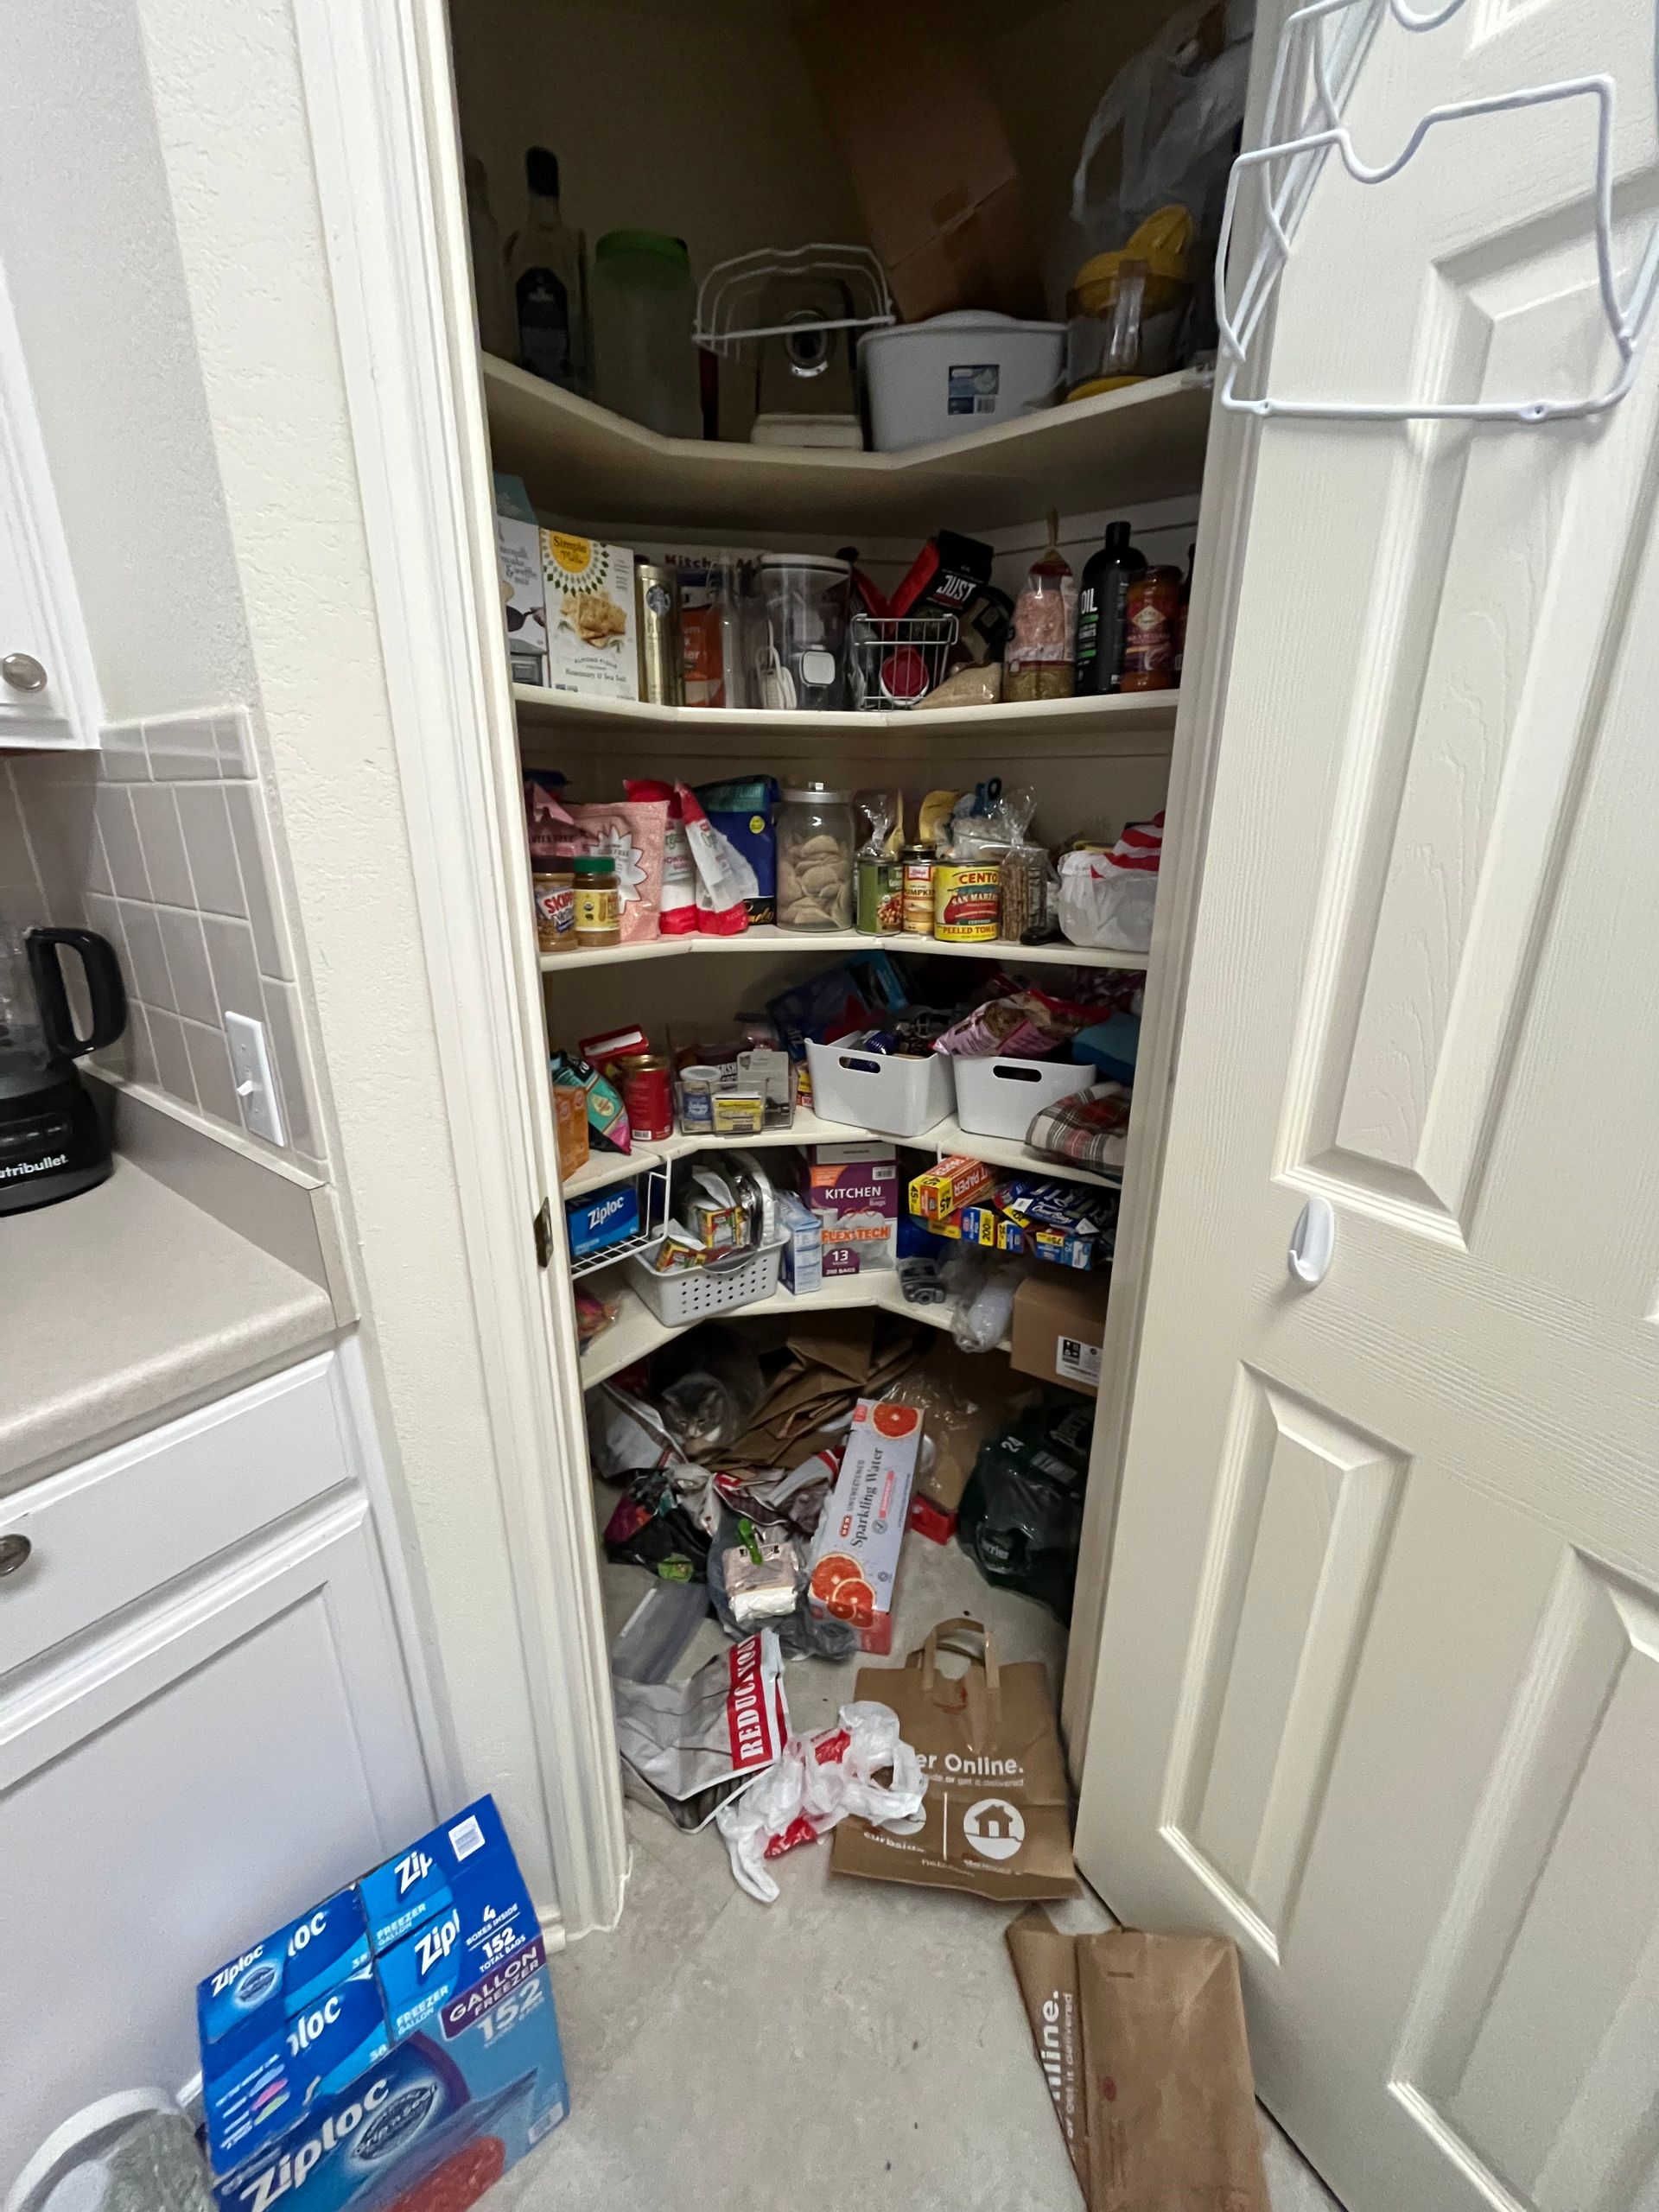 Pantry before The Spruce Goose organized